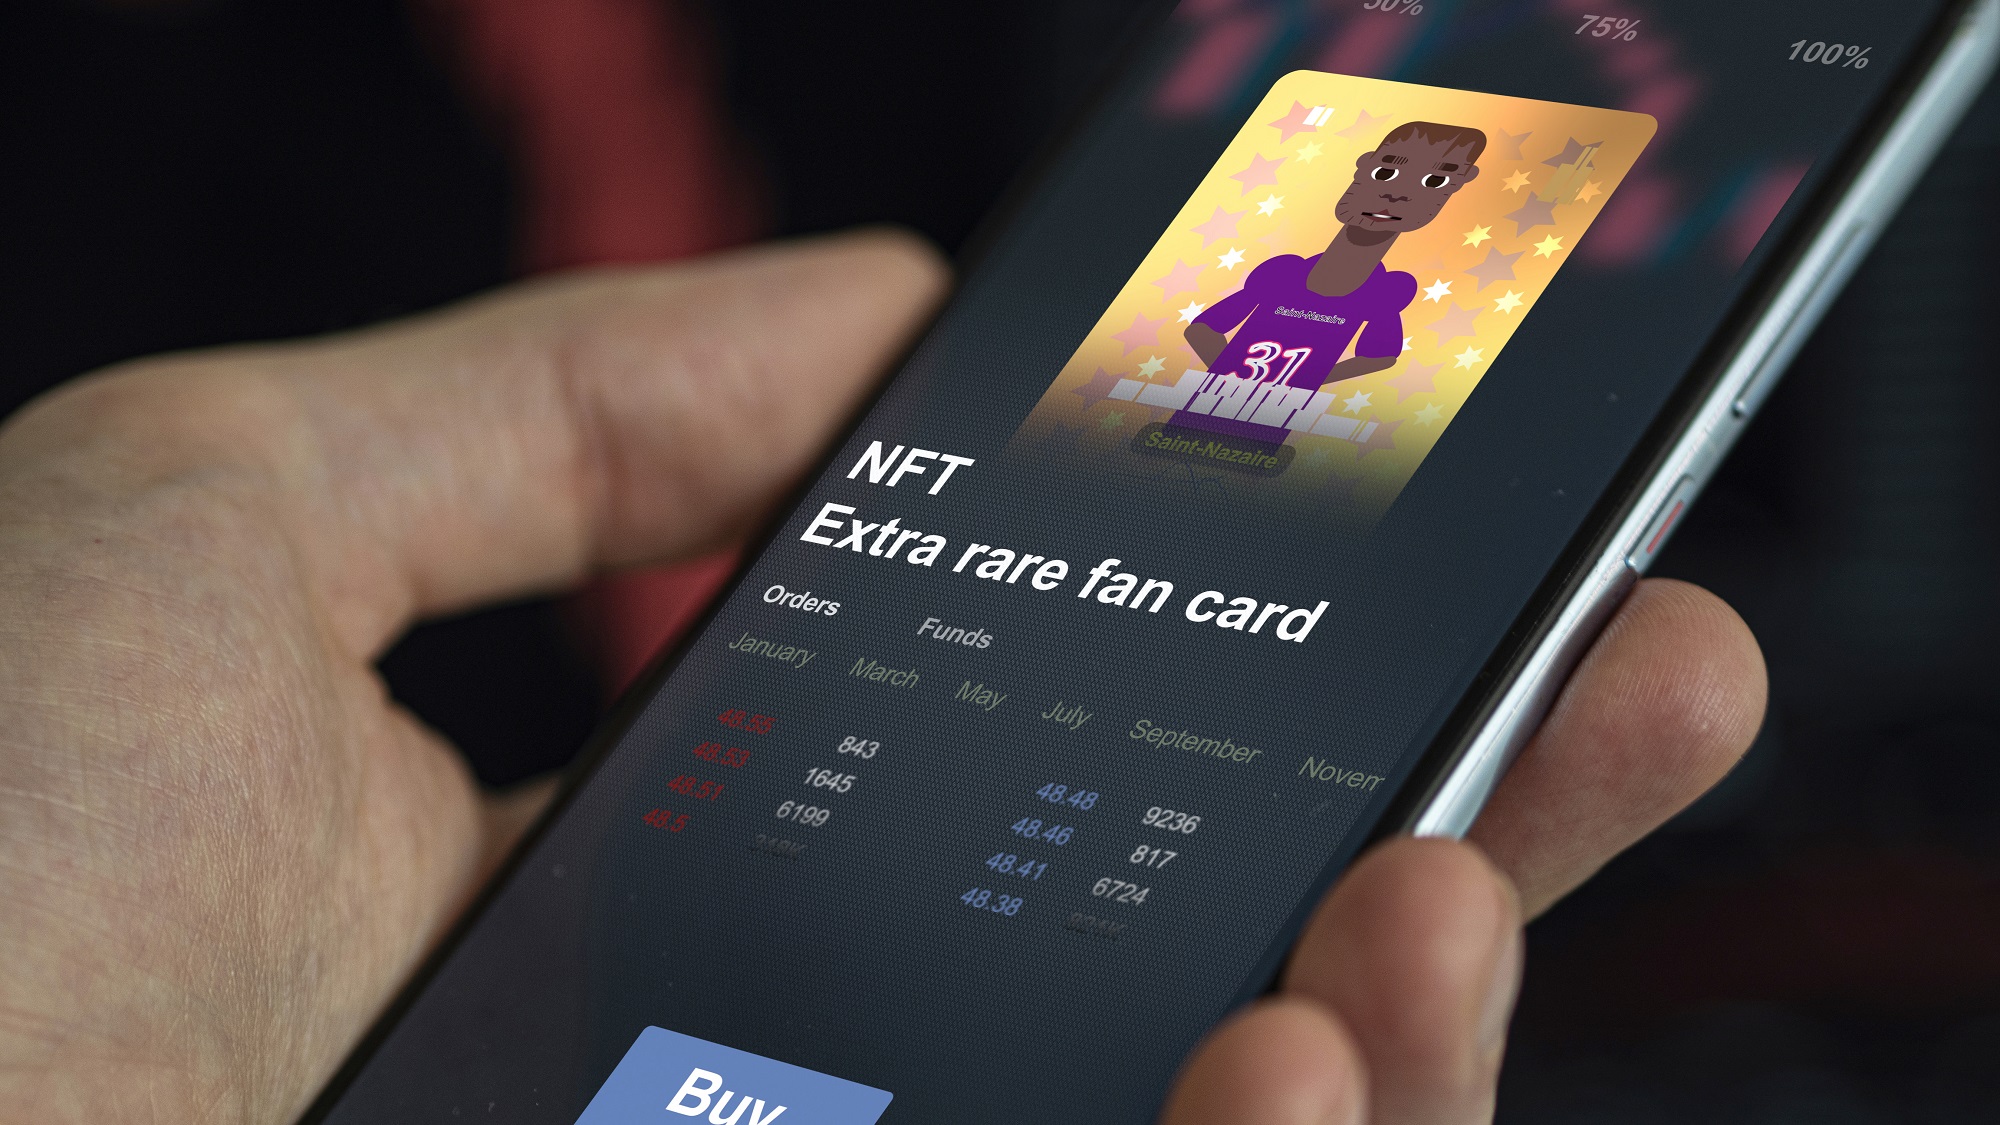 A smartphone user holds a device with an image of a sports player on it. Text reading &amp;ldquo;NFT Extra Rare Fan Card&amp;rdquo; is displayed below the image, along with a &amp;ldquo;Buy&amp;rdquo; button.